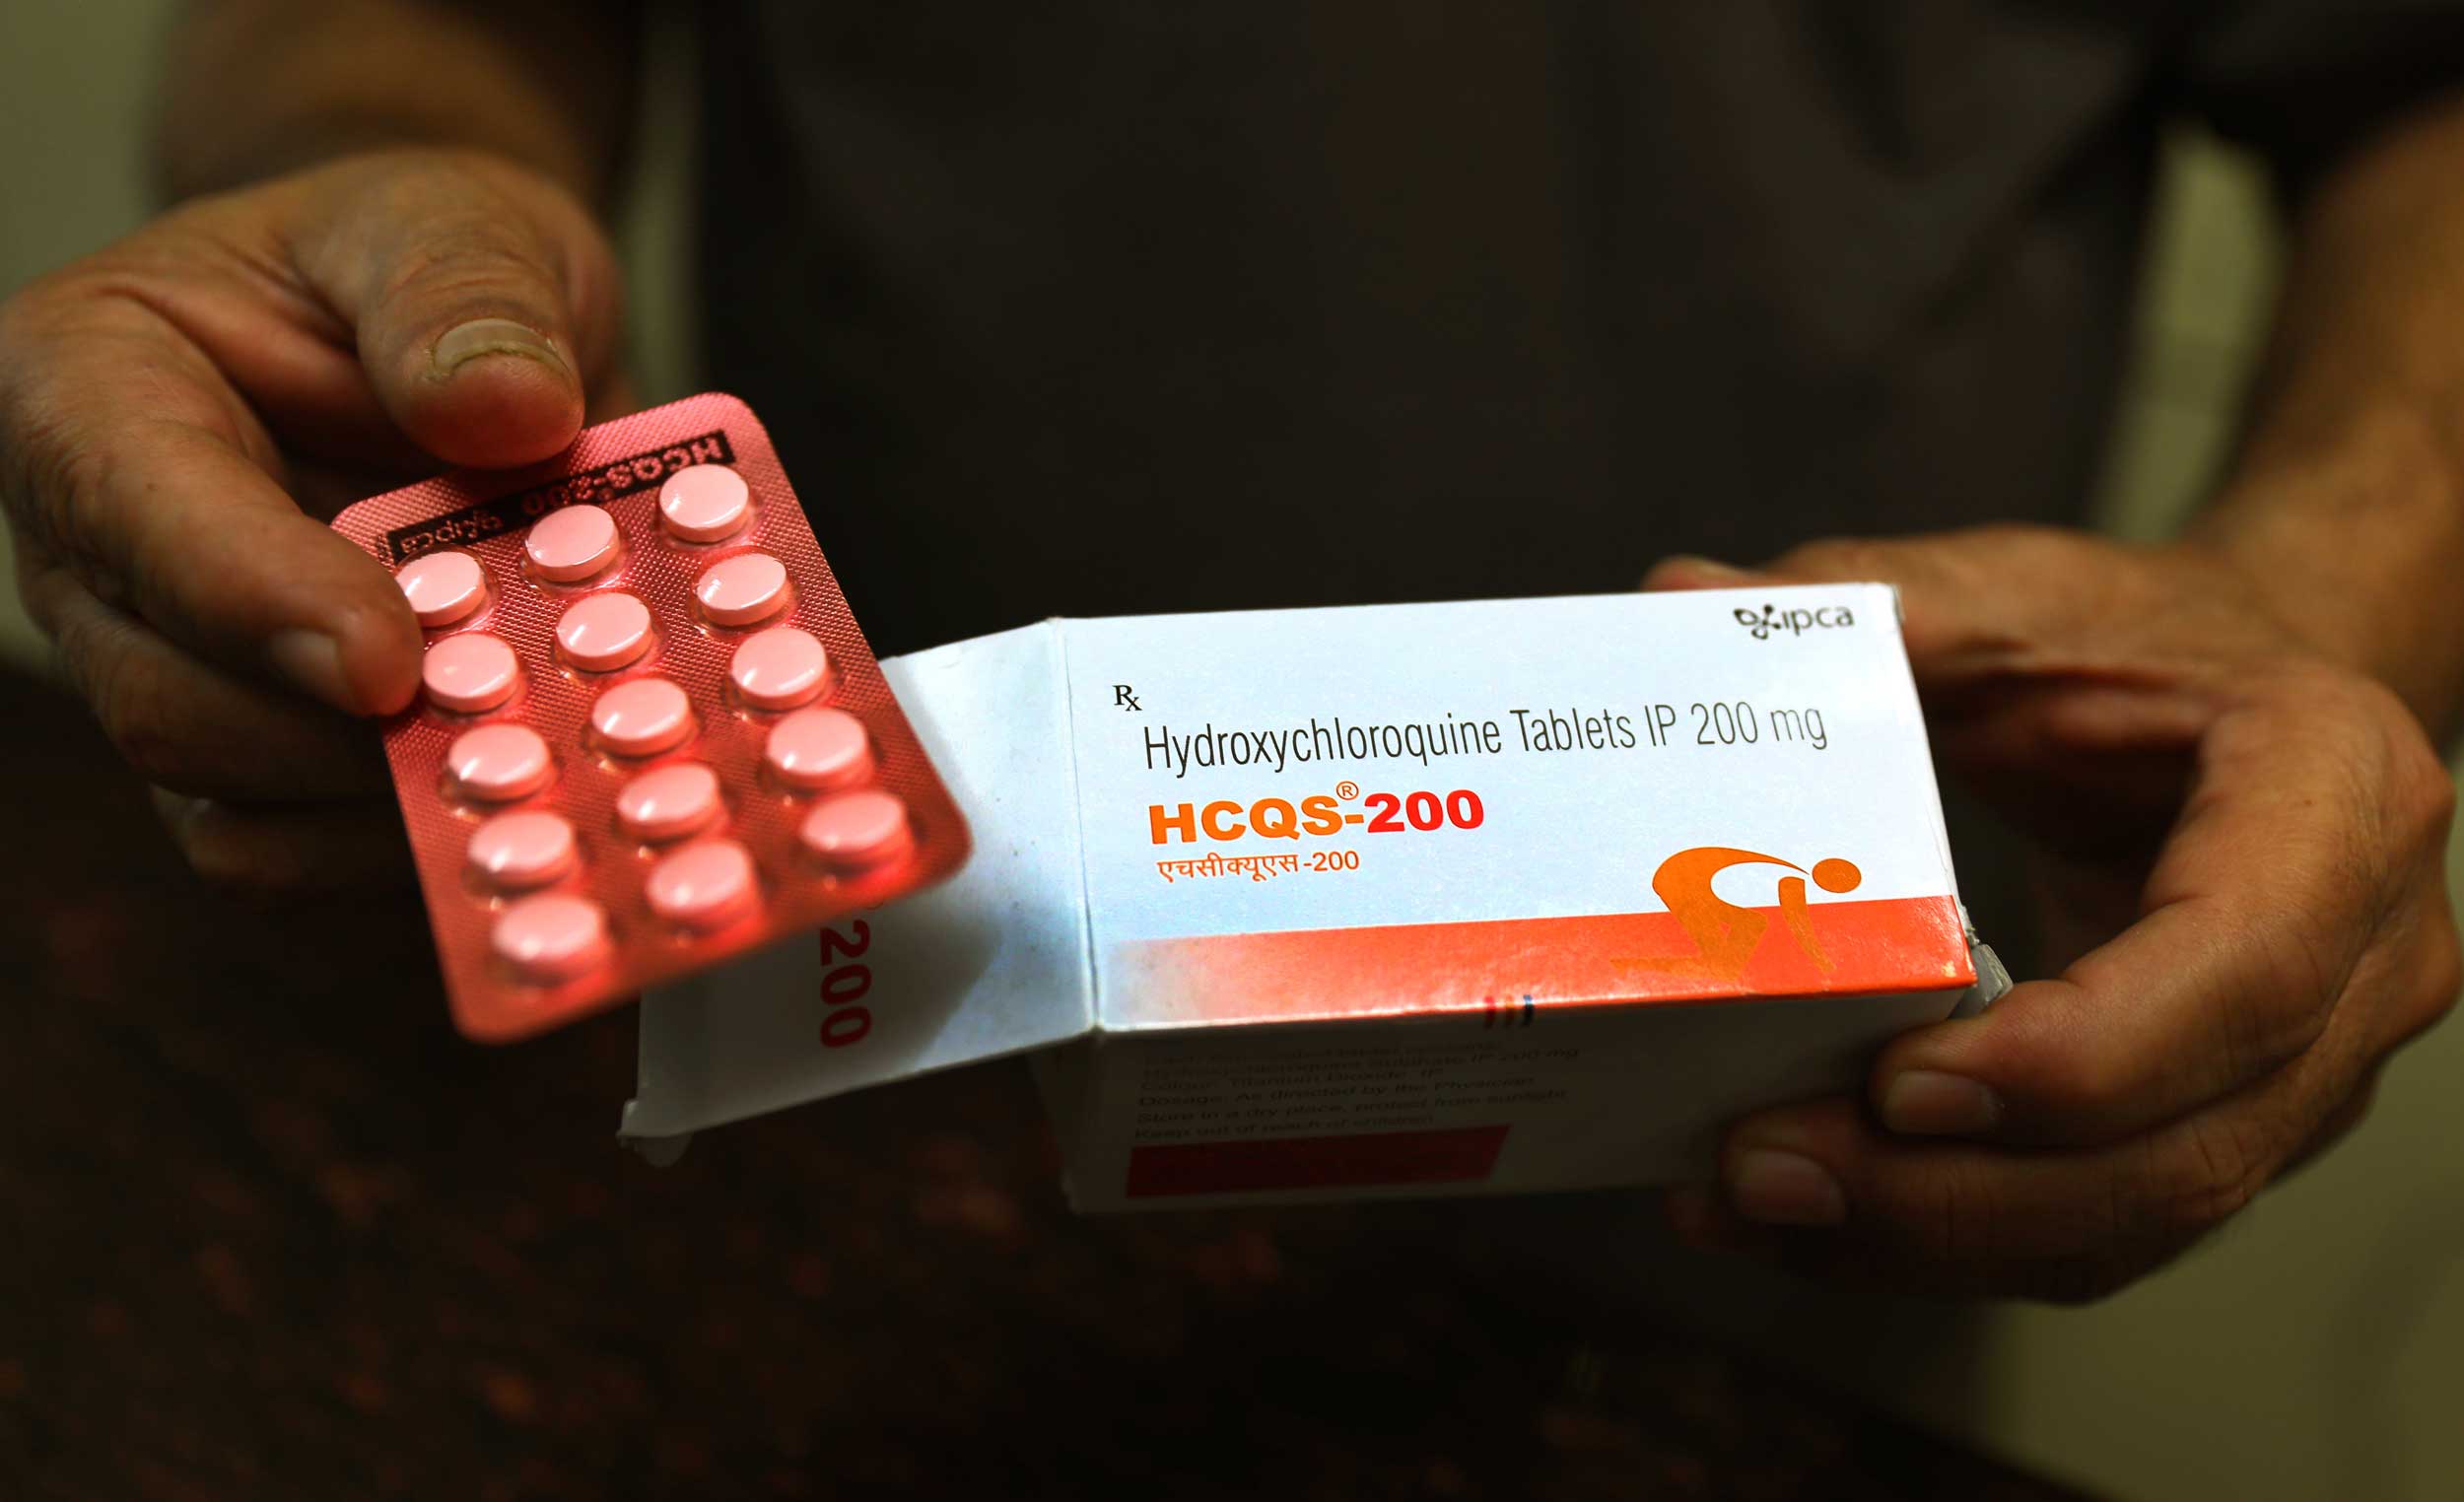 Health authorities in India, America and some other countries are treating Covid-19 patients who have severe symptoms with hydroxychloroquine and azithromycin, citing studies that have suggested the combination might lessen the impact of viral infections.
